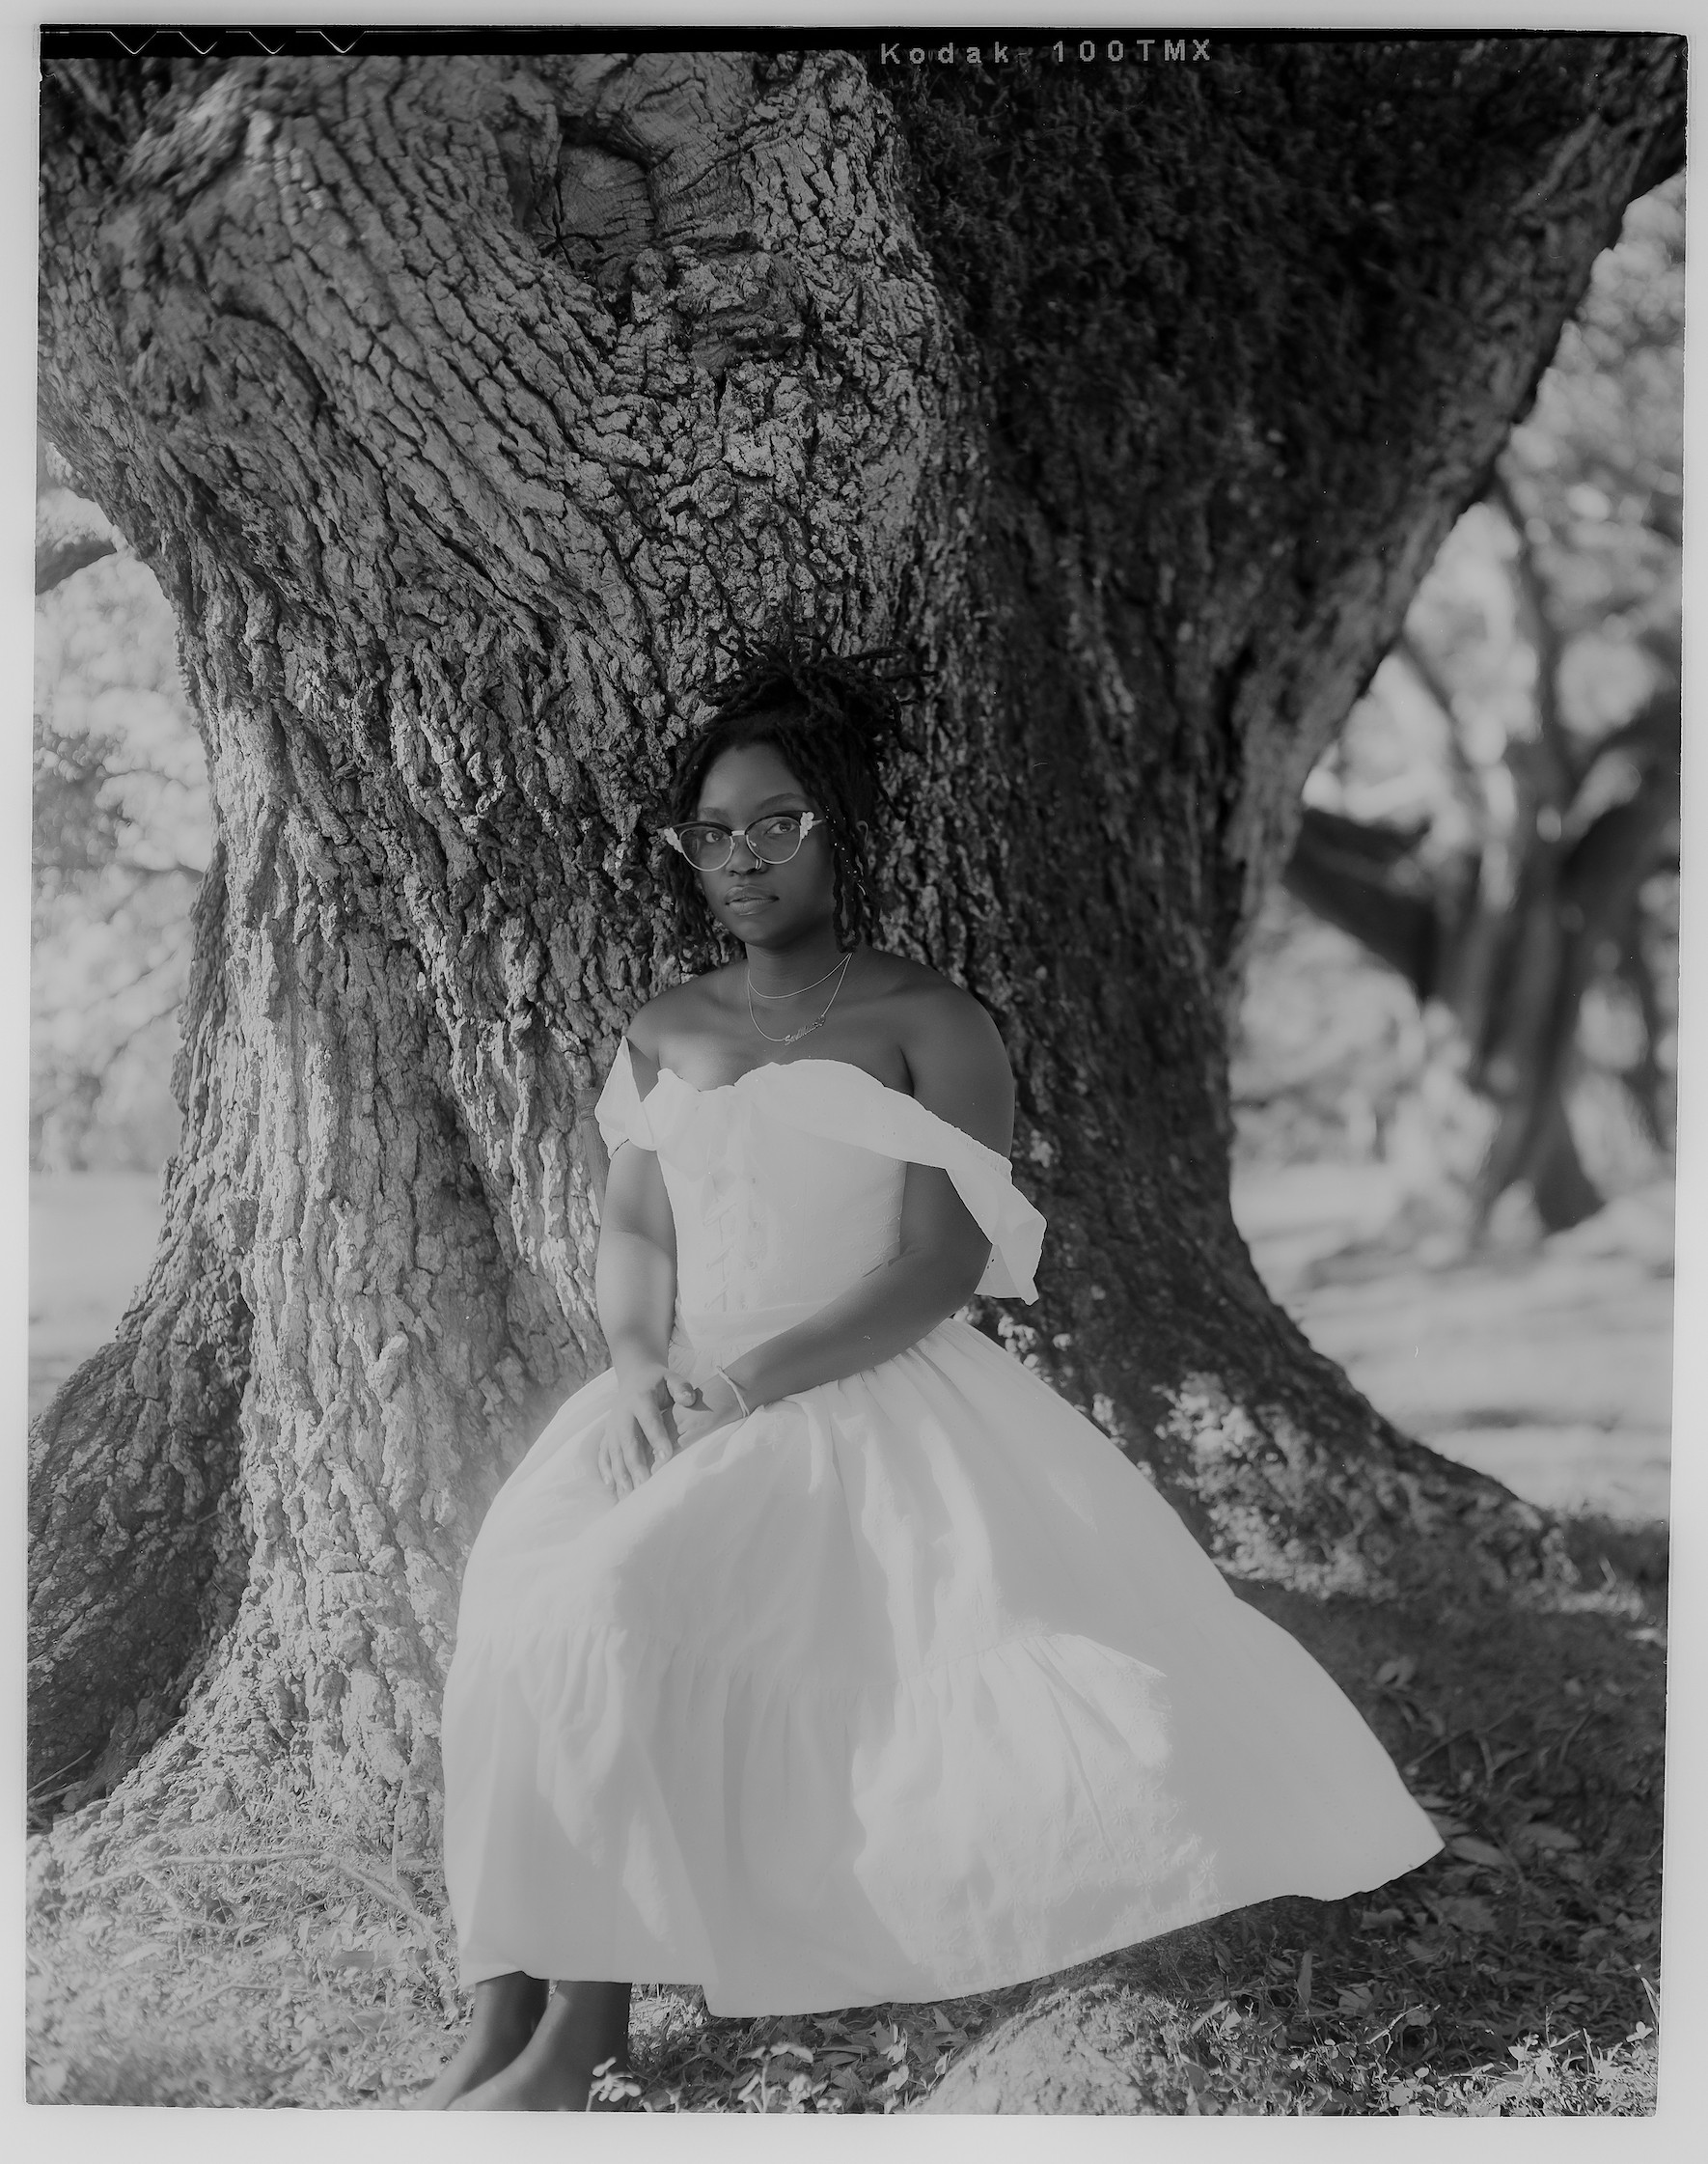 In this black and white portrait, Ra Malika Imhotep sits at the base of an enormous tree, wearing a long white off-the-shoulder dress and cat eye glasses